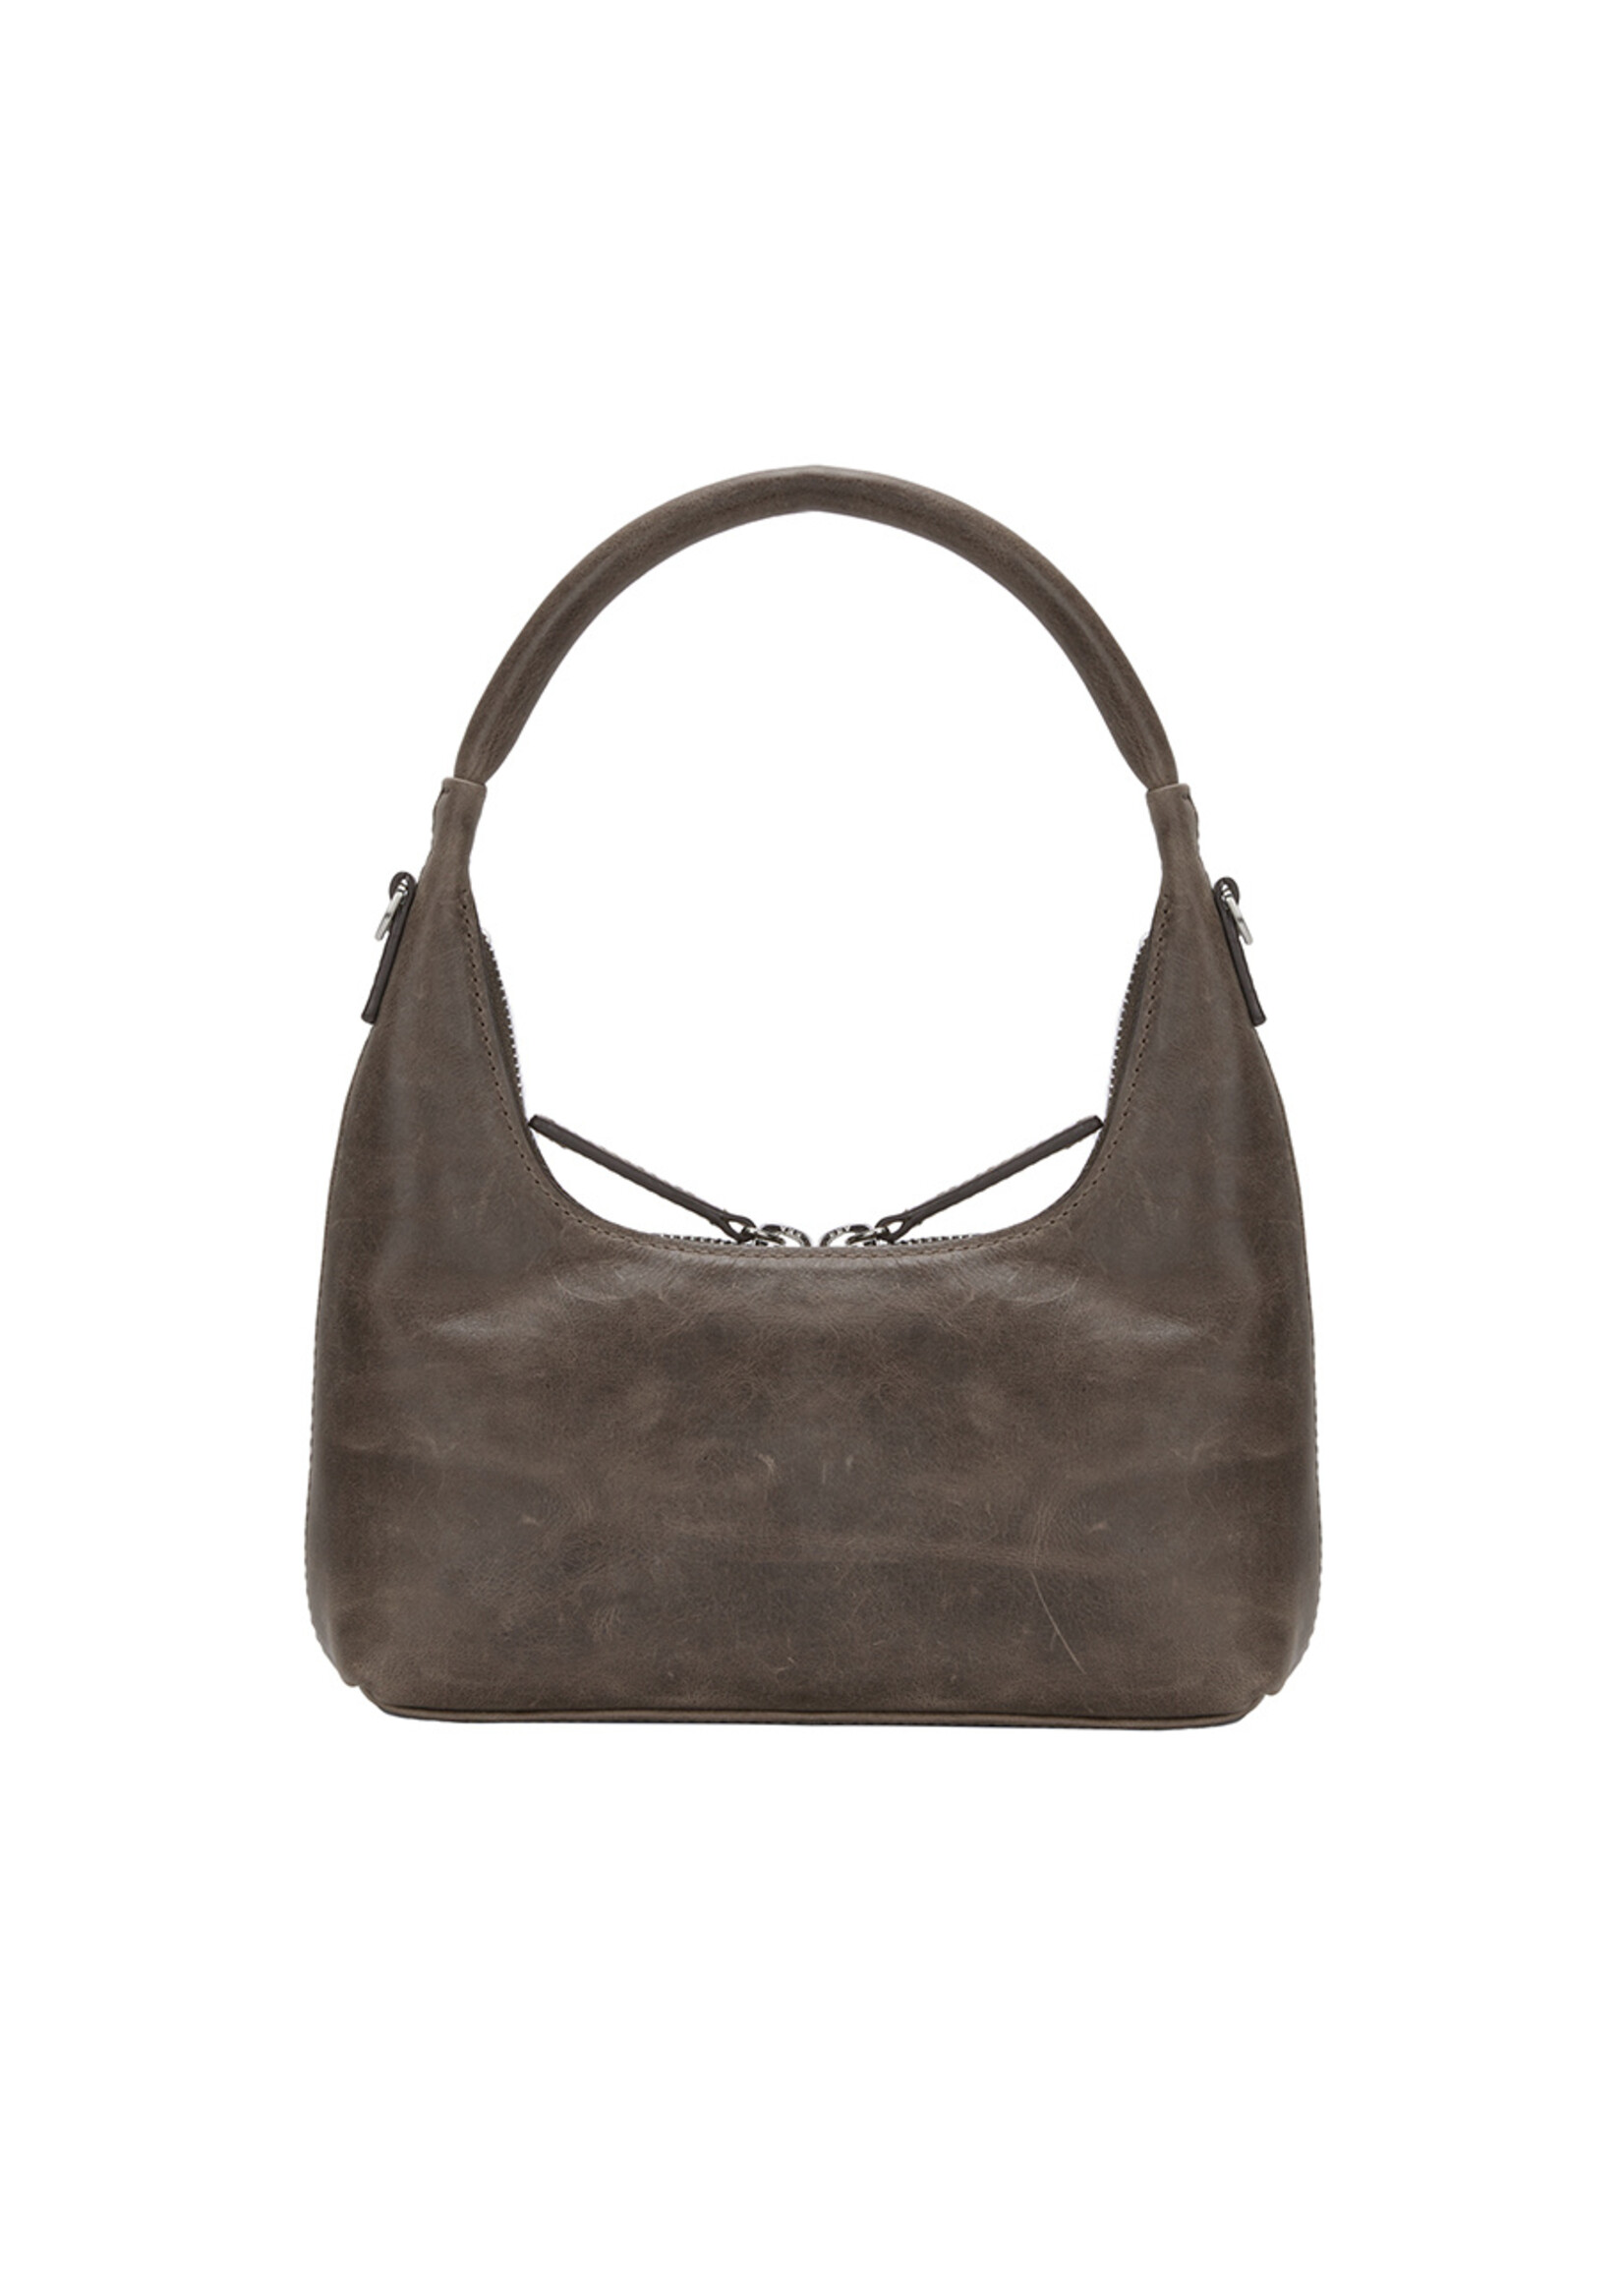 MARGE SHERWOOD Hobo Mini Bag in Washed Brown Leather